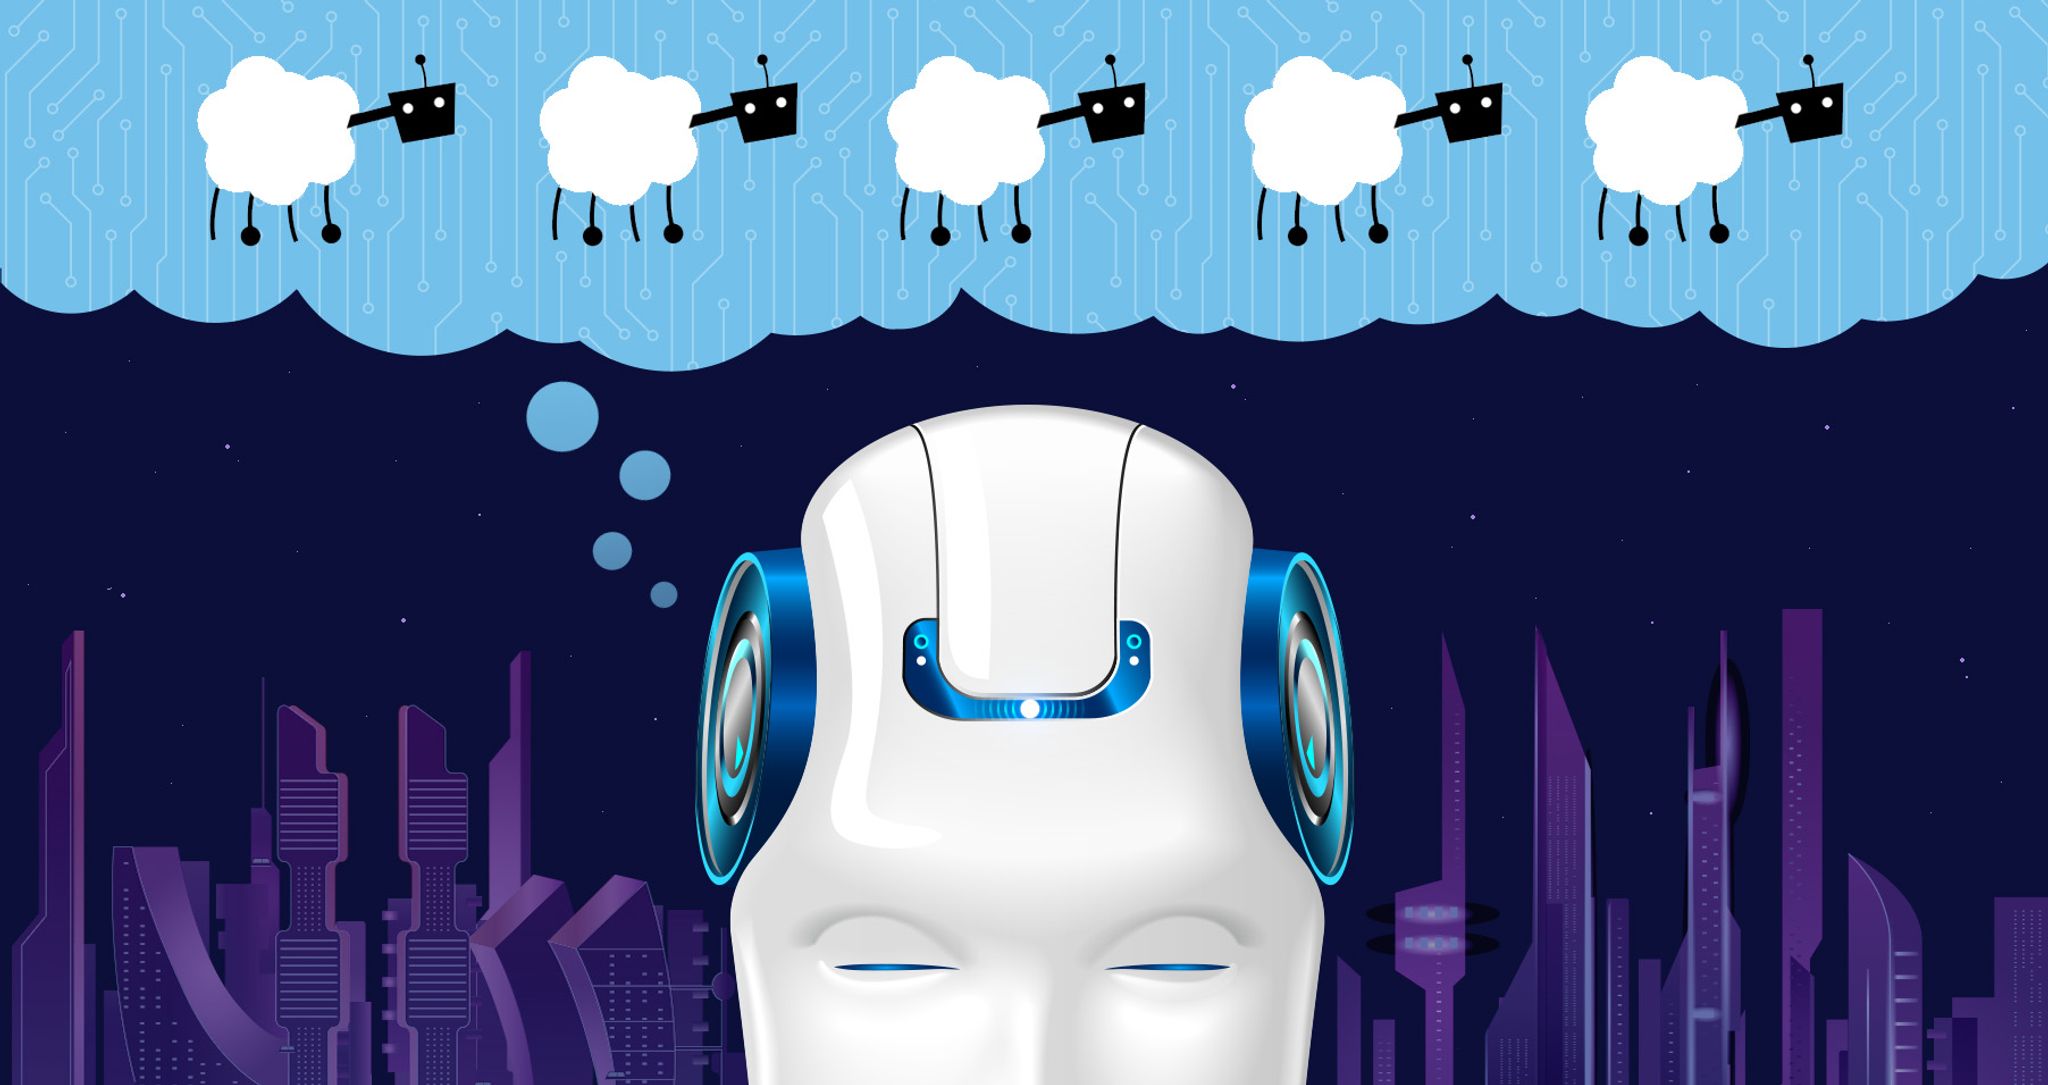 An android with its eyes closed, and a cloud above showing it dreaming of electric sheep.